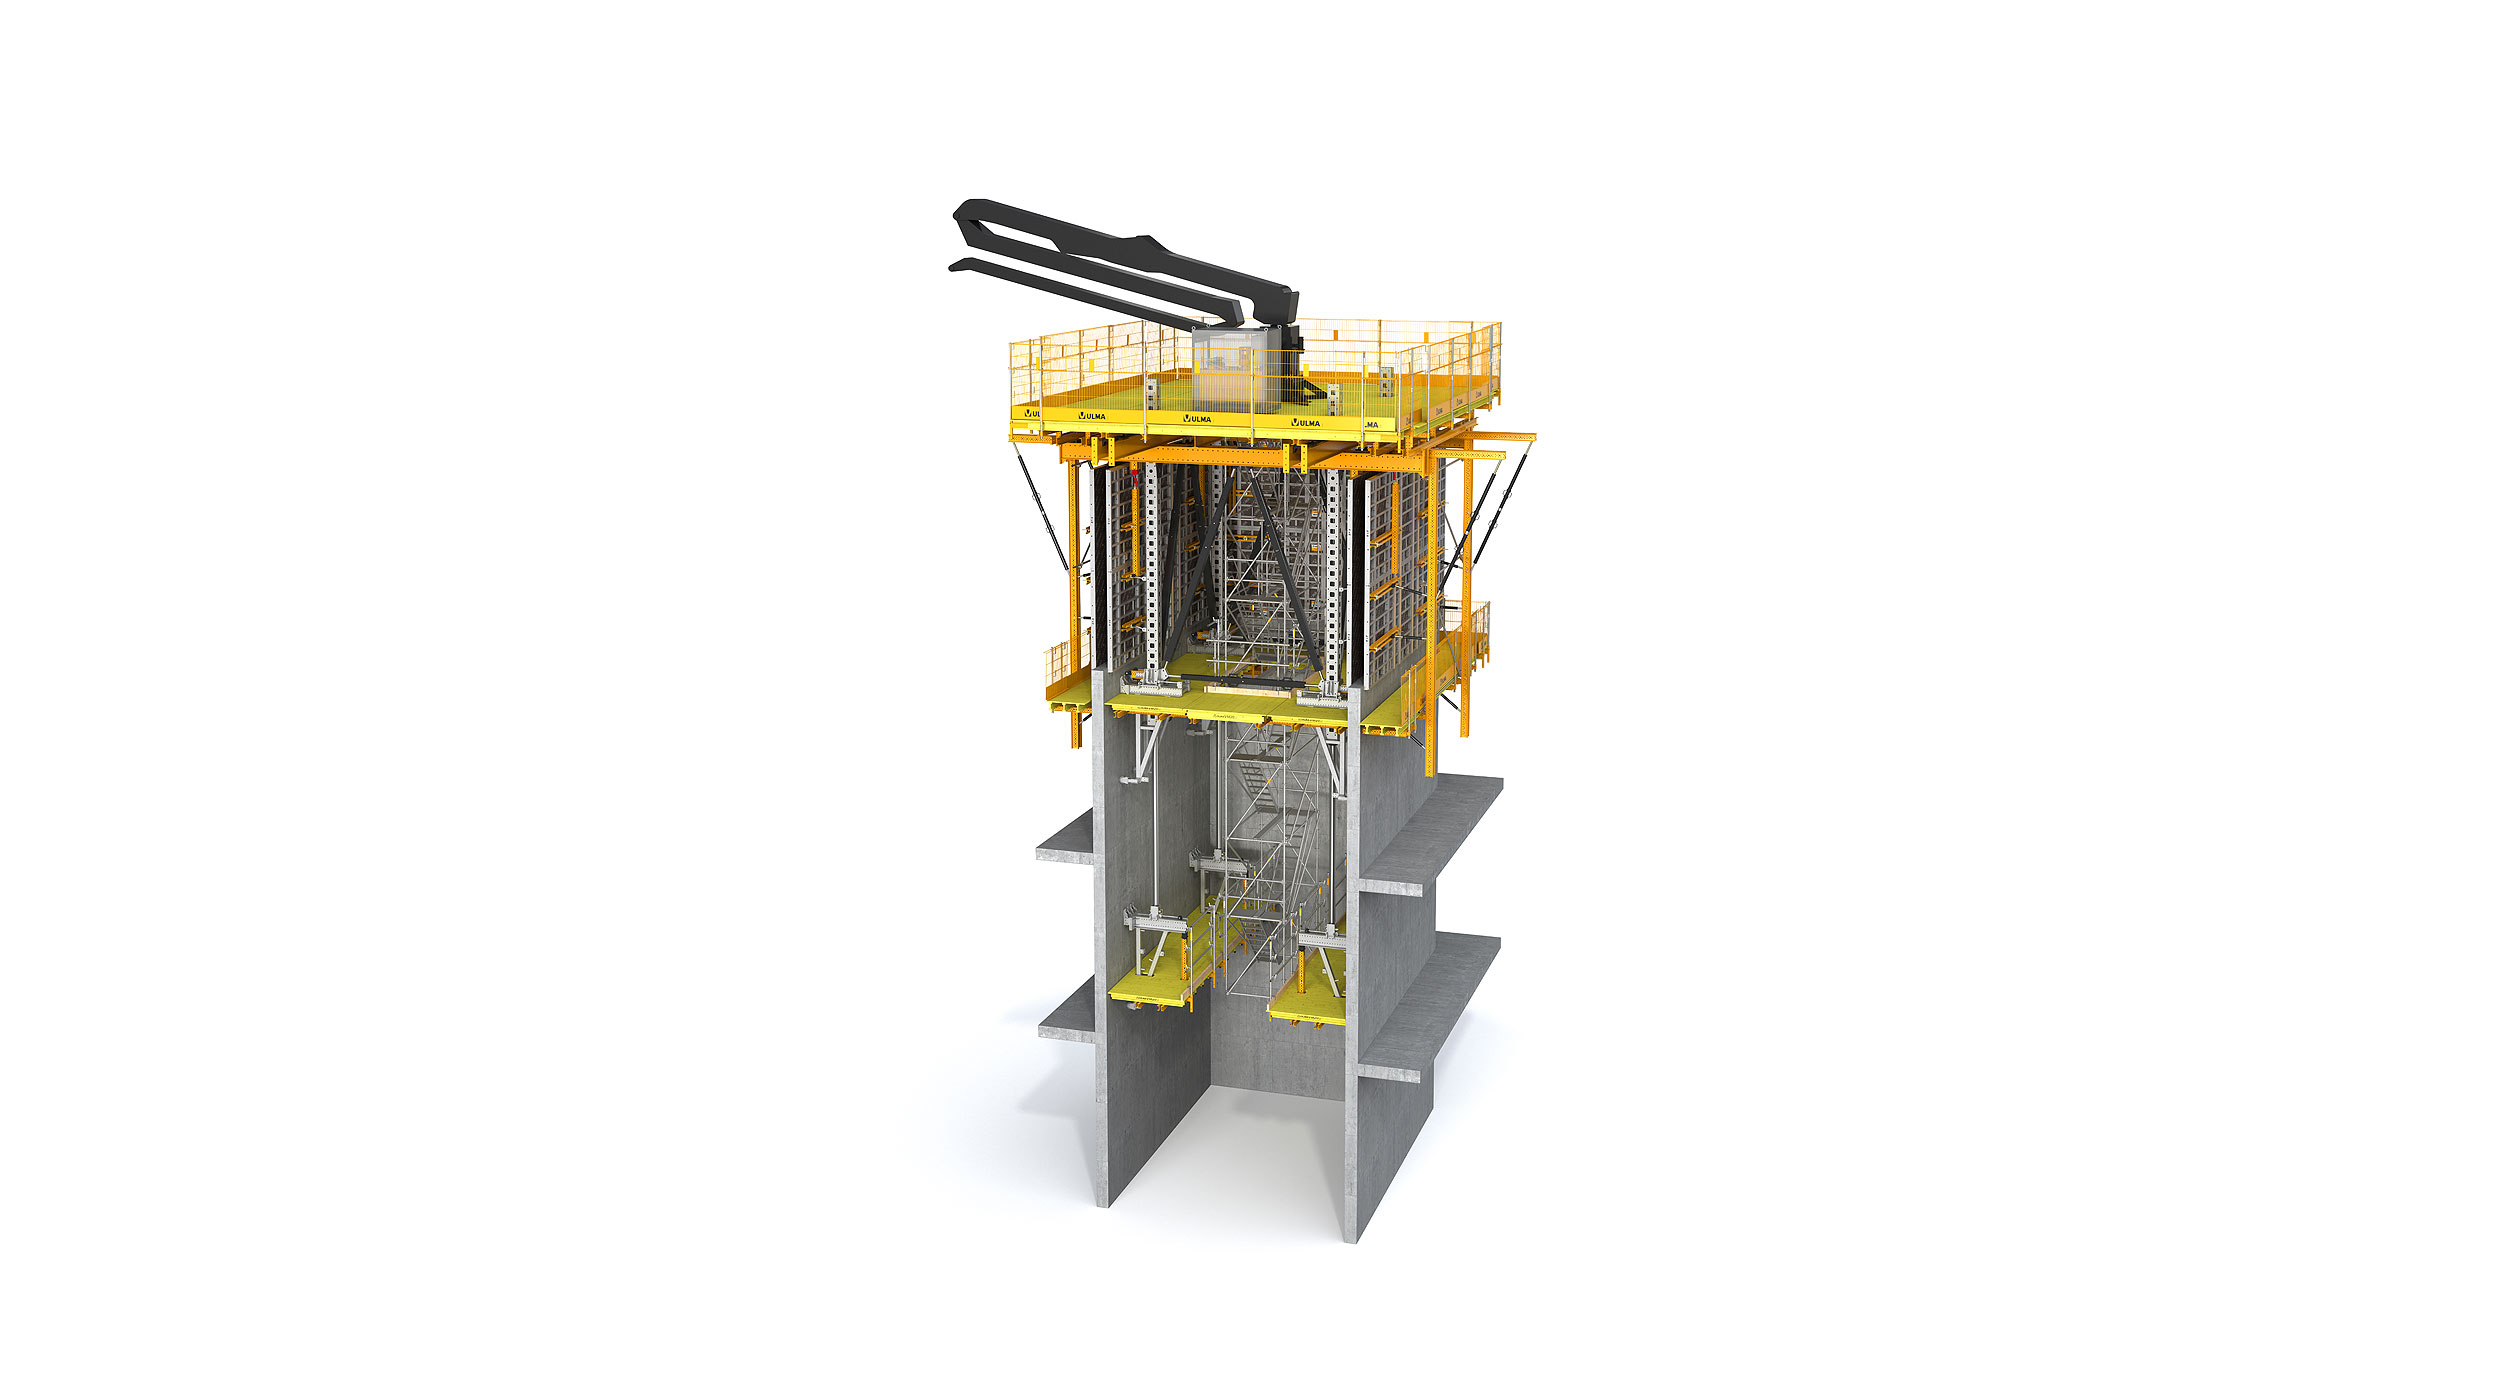 A high capacity self-climbing system with maximum productivity for large High-rise building cores.